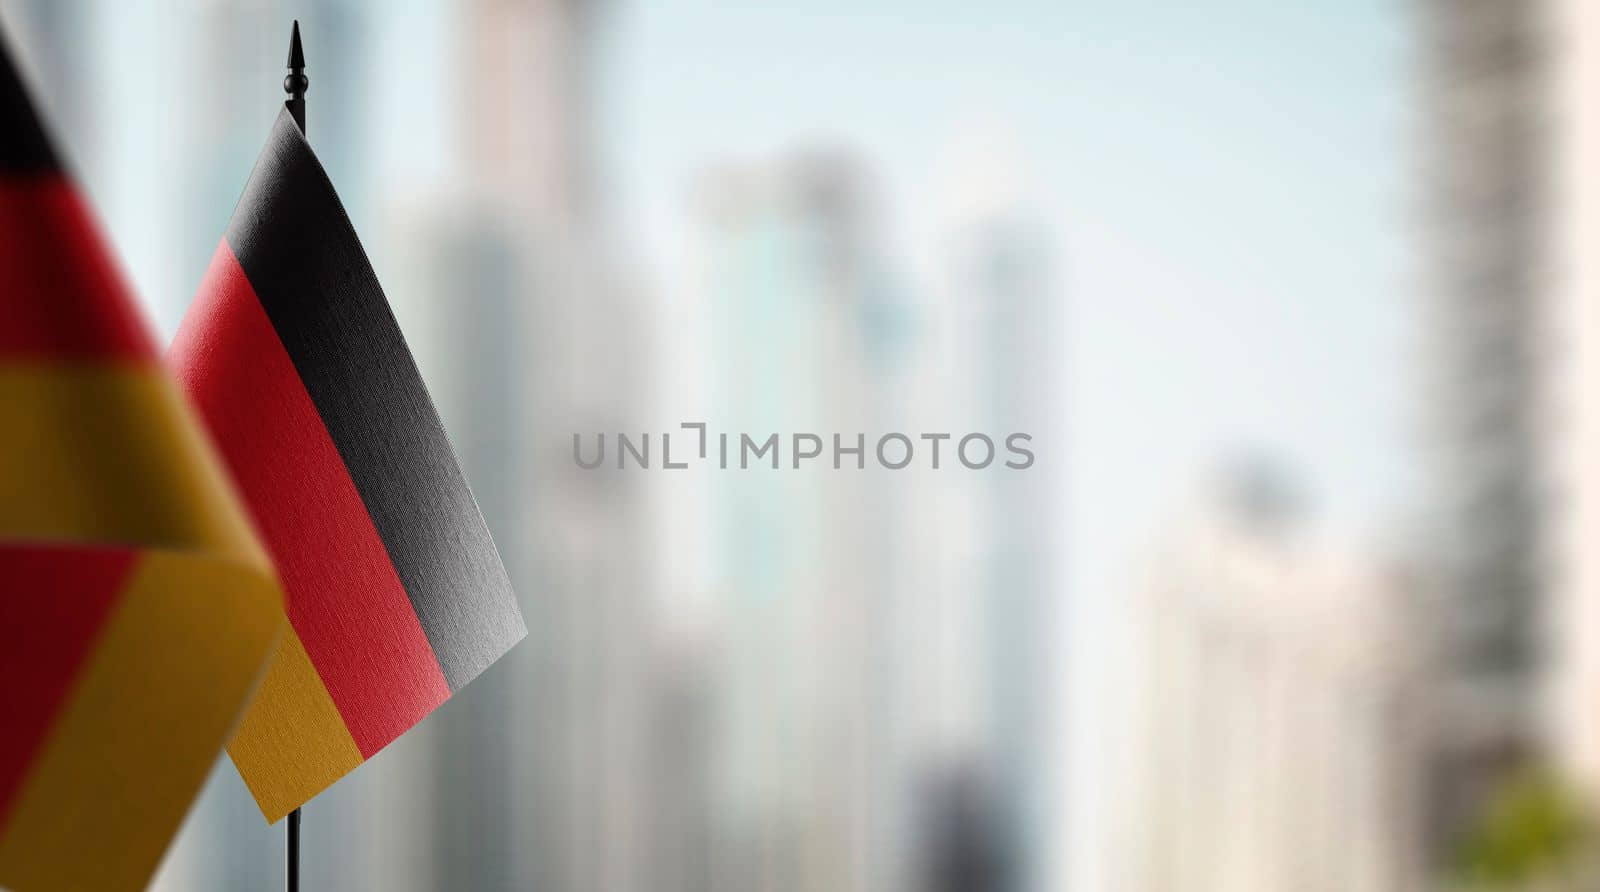 A small Germany flag on an abstract blurry background.